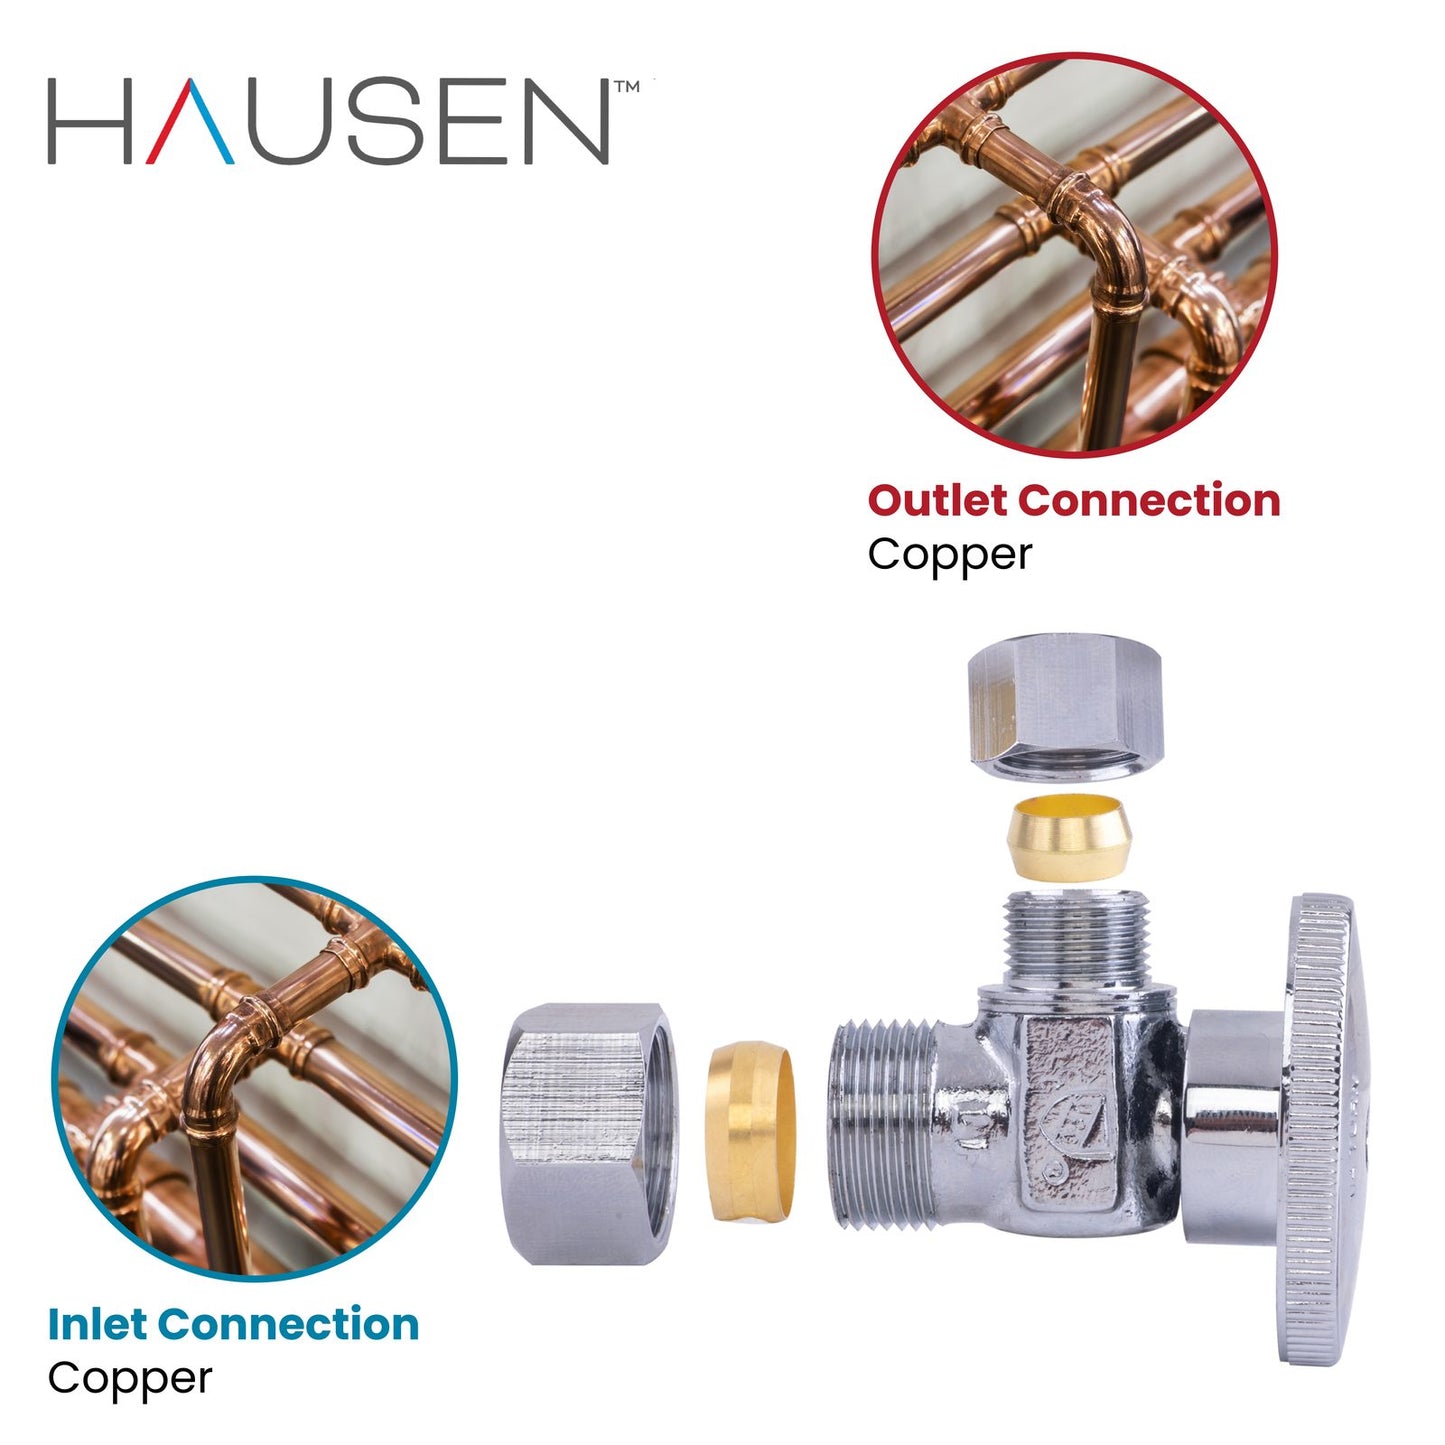 Hausen 1/2-inch Nominal Compression Inlet x 3/8-inch O.D. Compression Outlet 1/4-Turn Angle Water Stop; Lead-Free Forged Brass; Chrome-Plated; cUPC/ANSI/NSF Certified; Compatible with Copper Piping, 5-Pack